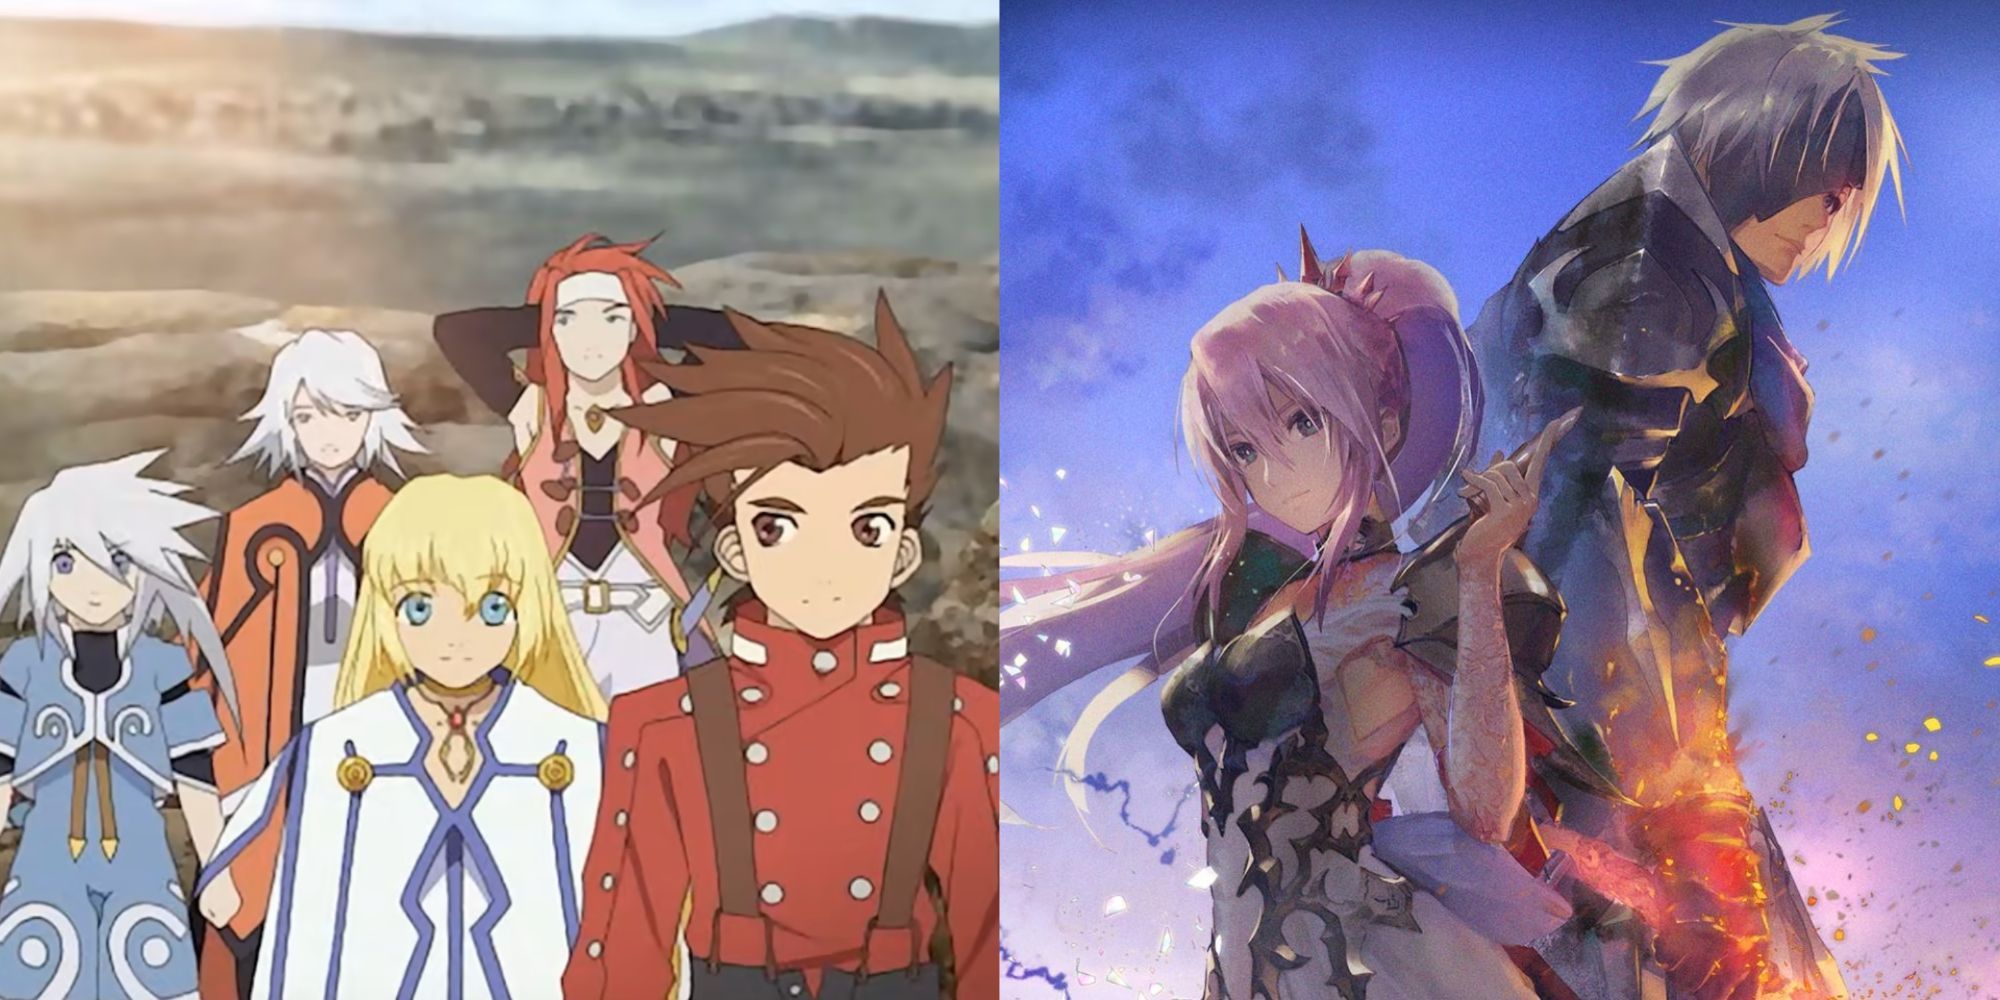 Tales of Symphonia Remastered and Tales of Arise promo art featuring the cast of each game